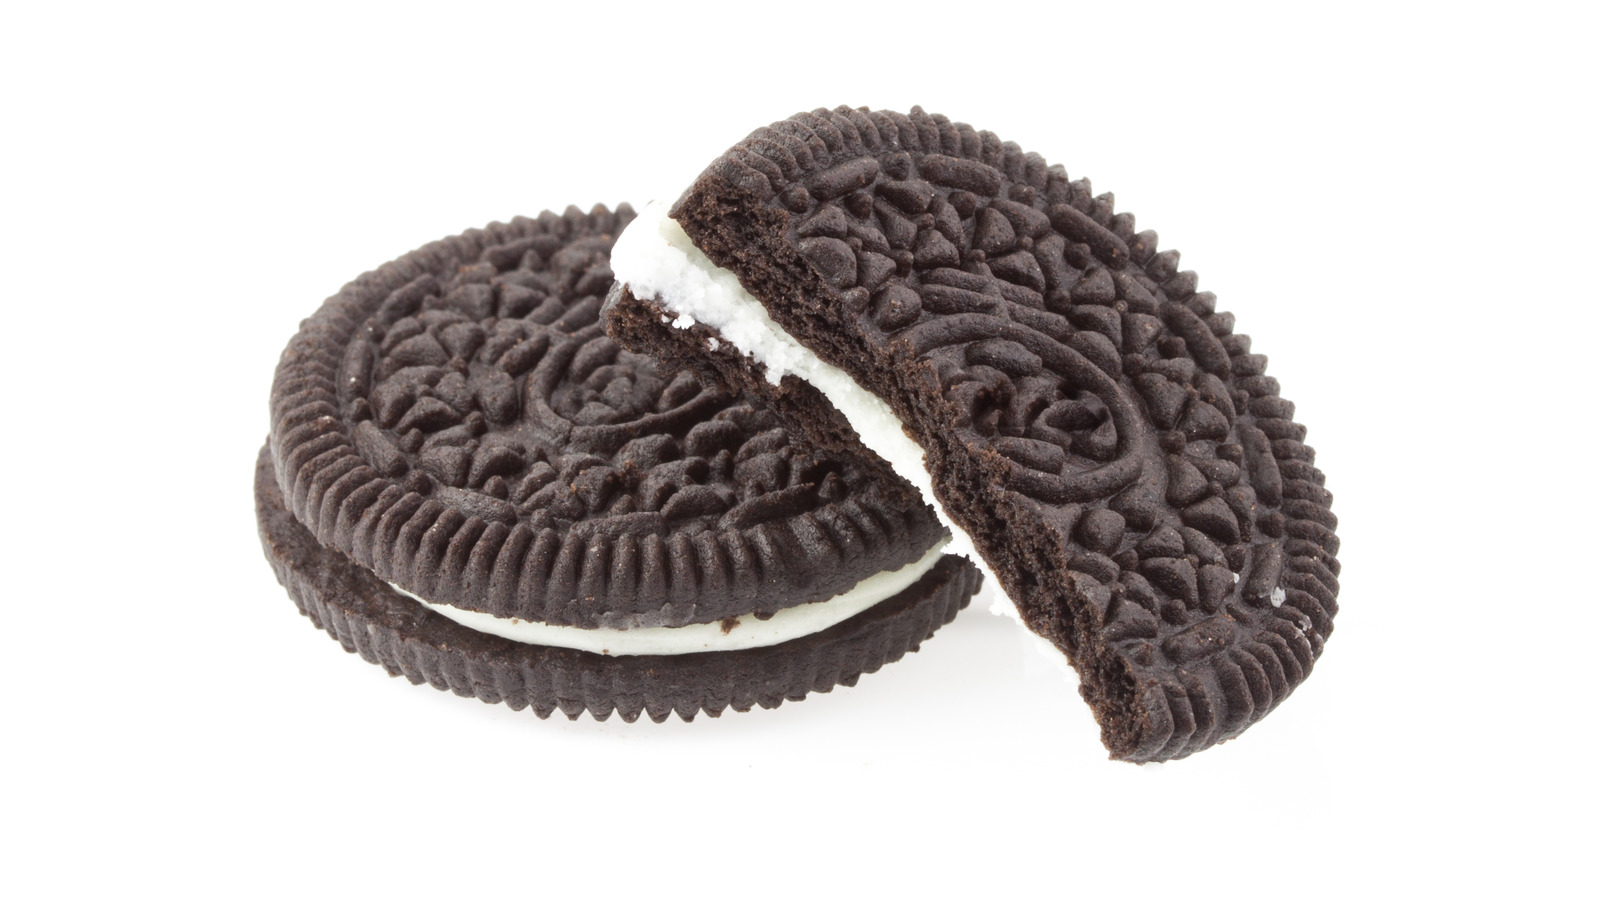 The Surprising Inspiration Behind The Oreo Design